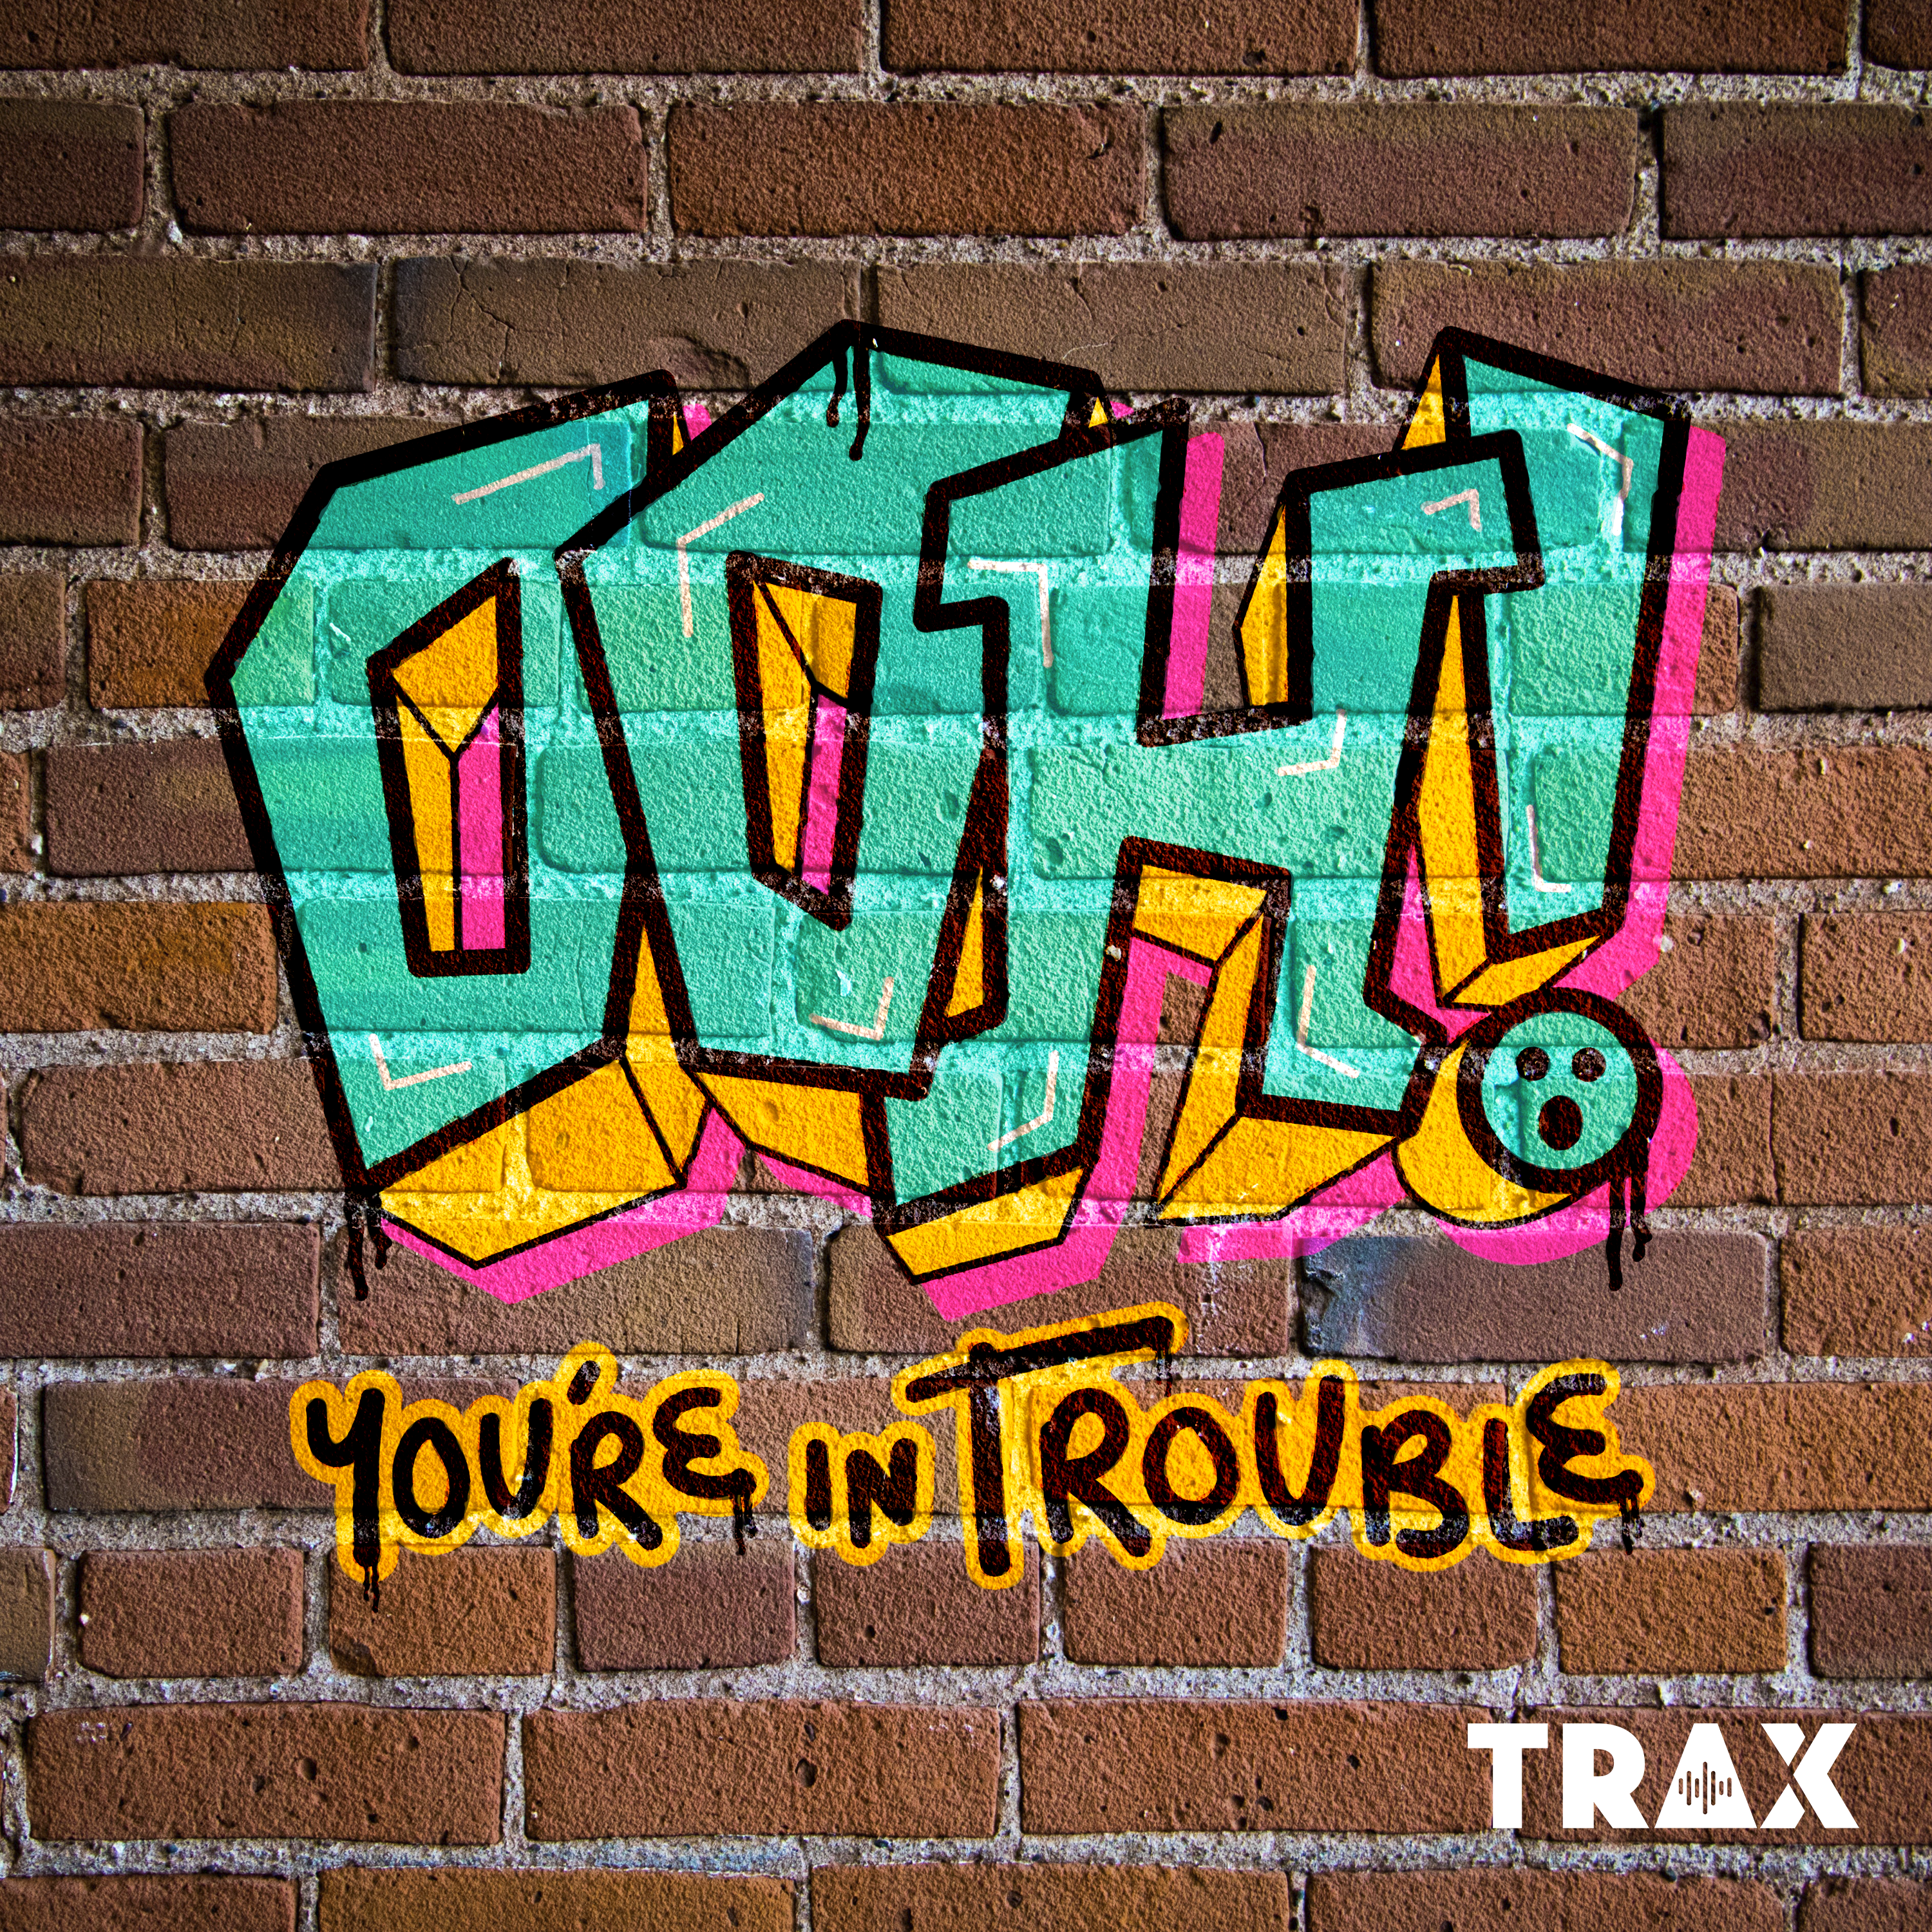 Ooh You're In Trouble:Mortified Media and TRAX from PRX